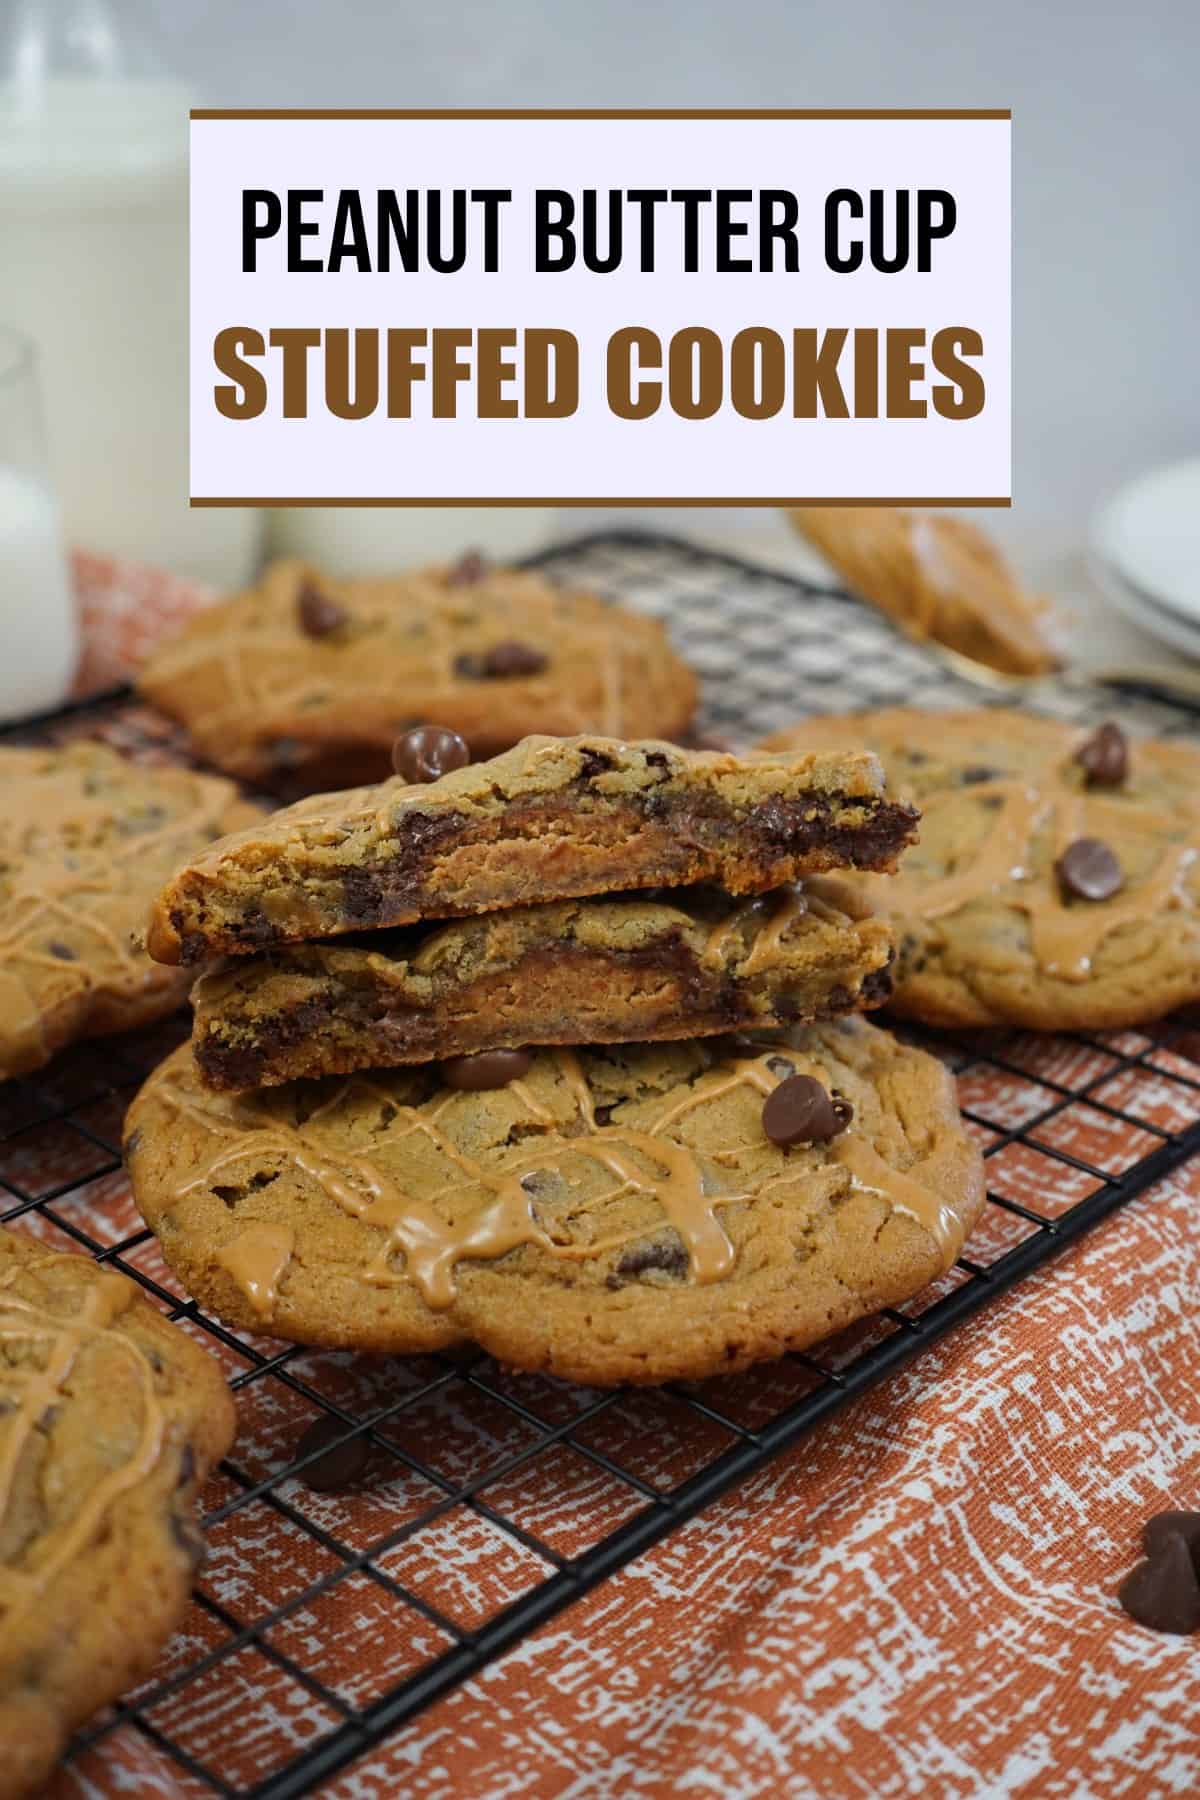 Peanut butter cup stuffed cookies with title. 